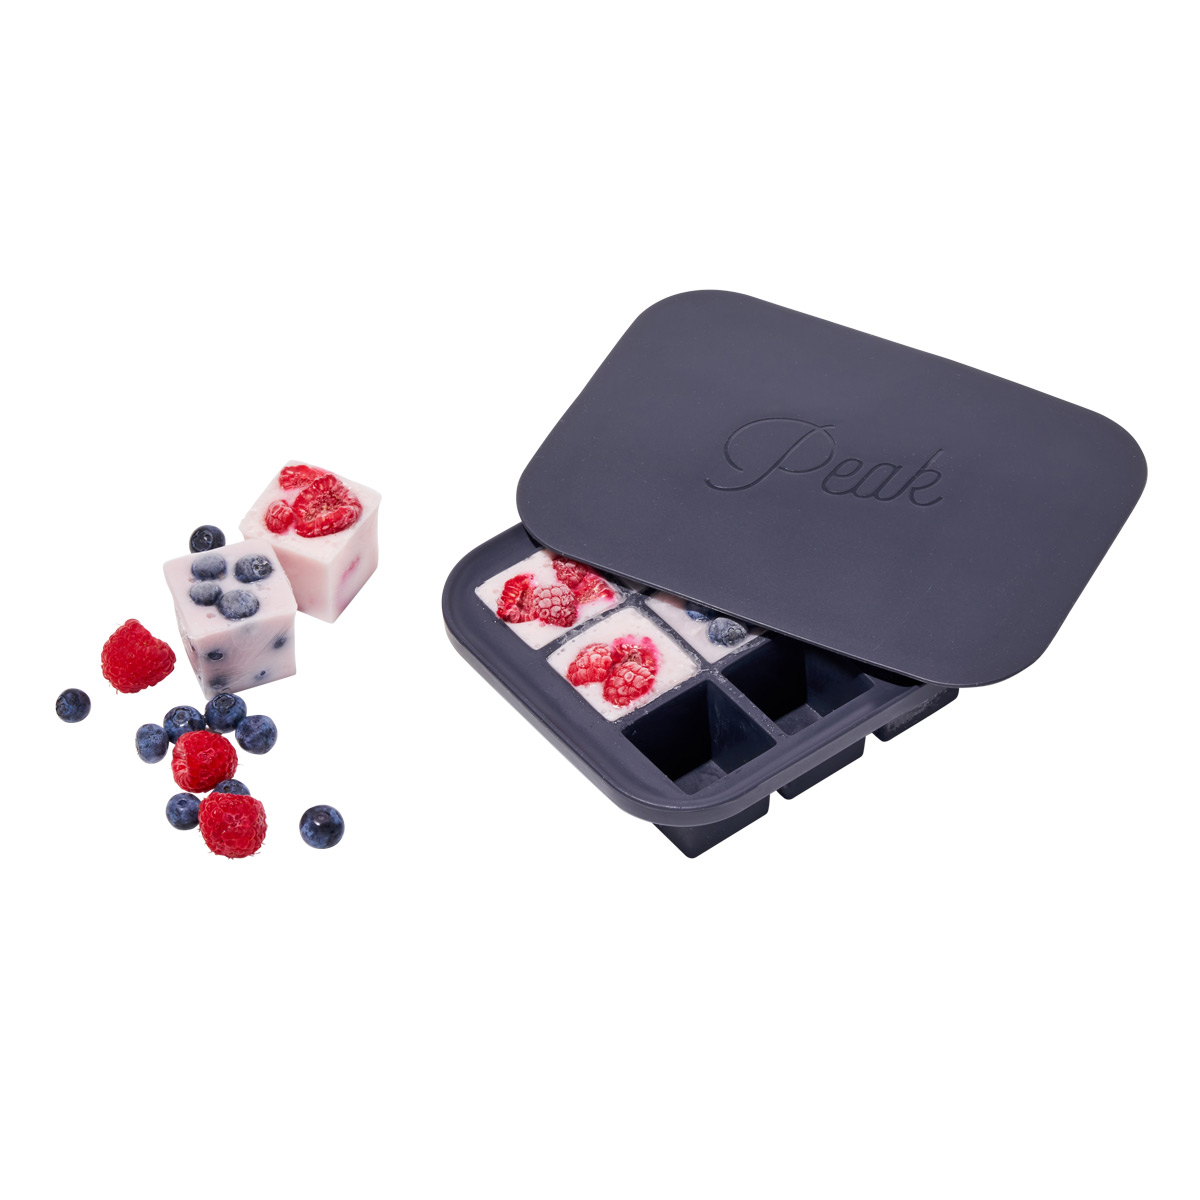 https://www.containerstore.com/catalogimages/433291/10085958-Everyday-Ice-Tray-VEN4.jpg